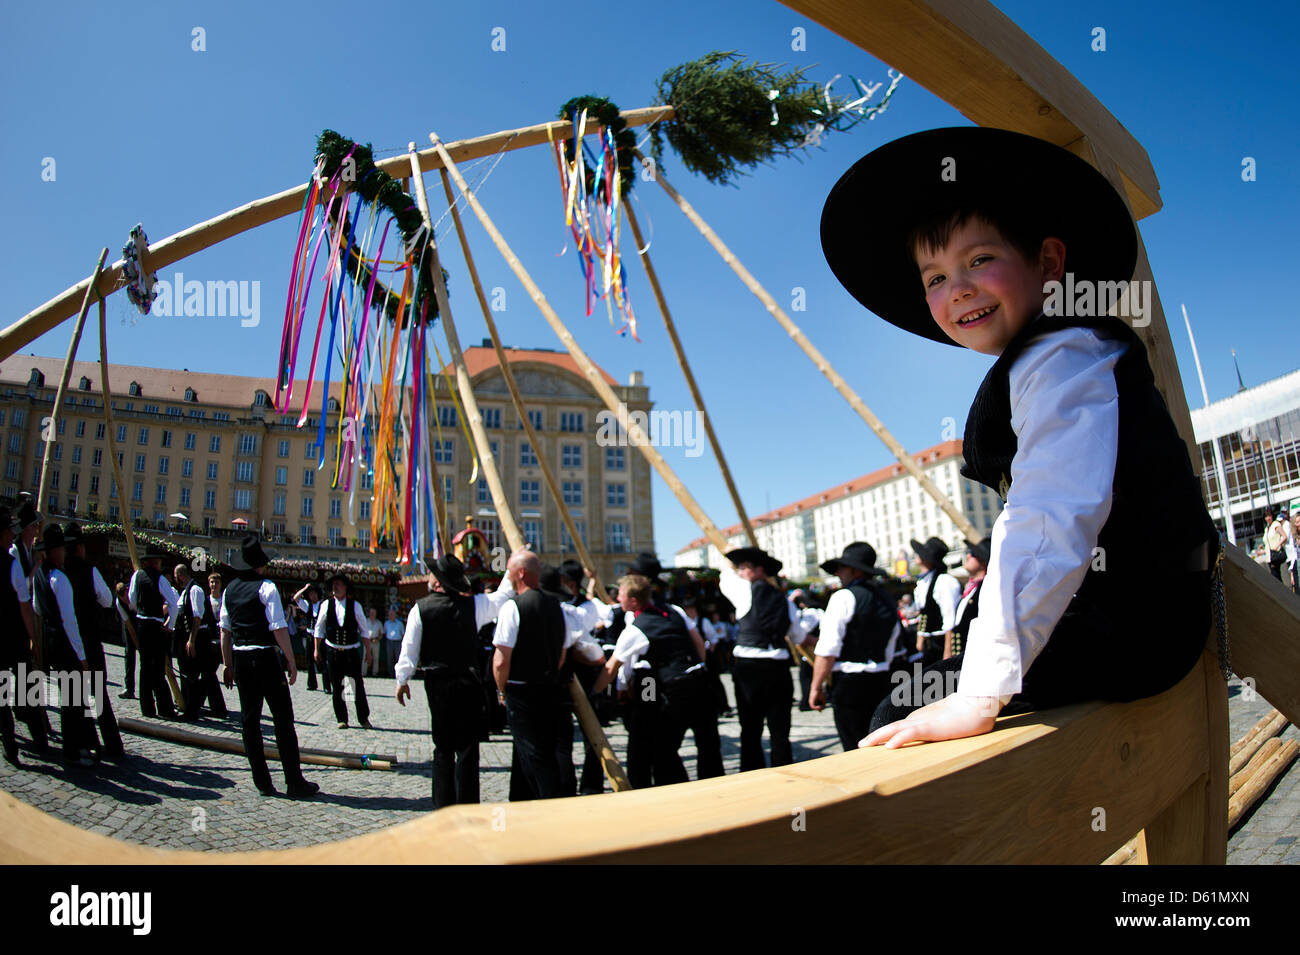 Young 'carpenter' Richard looks at his father during the traditional erecting of the maypole at the spring market (Altmarkt) in Dresden, Germany, 27 April 2012. The maypole is around 20 meters high and comes from Langebrueck in Dresdner Heide. Photo: Arno Burgi Stock Photo